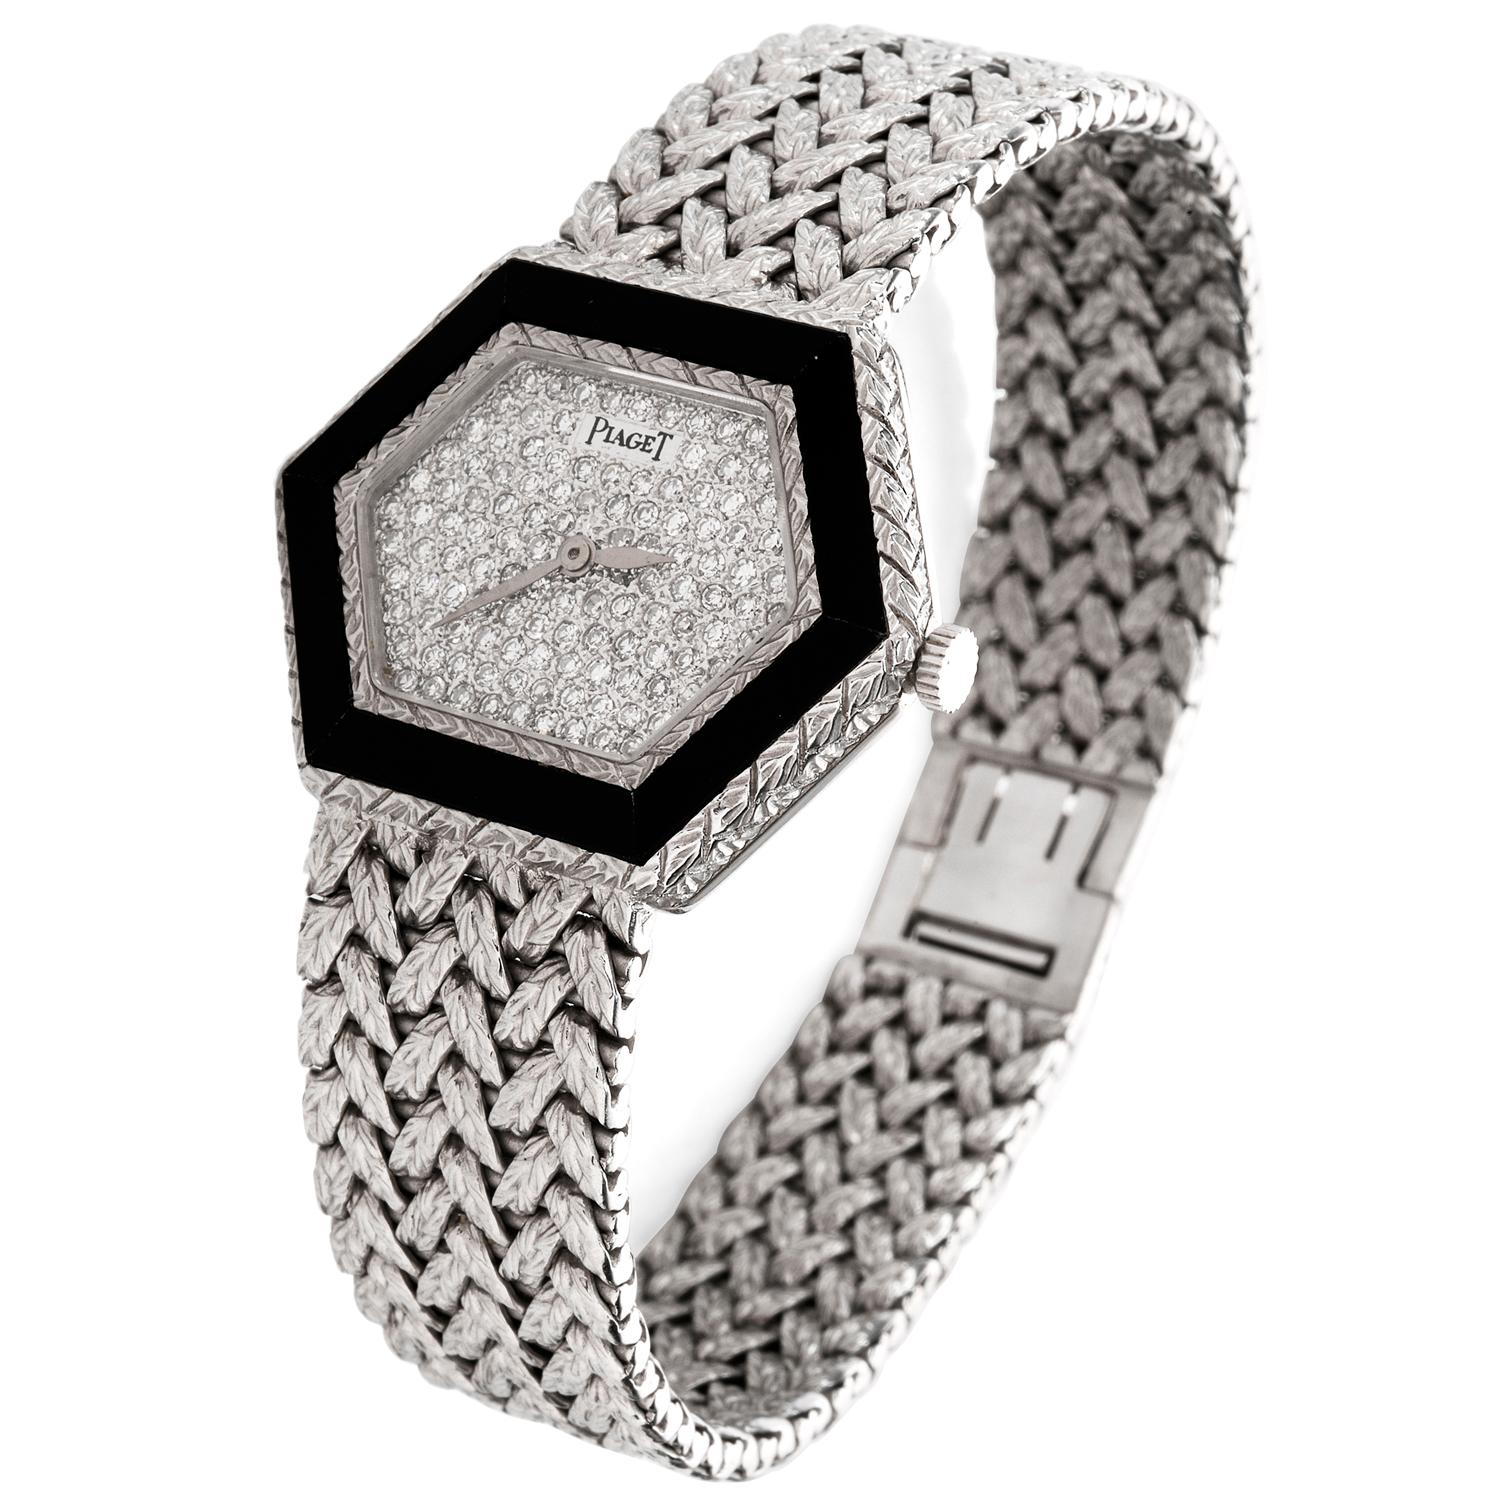 Rare Ladies Piaget Diamond and Onyx Ref. 95785 A6 Watch For Sale at ...